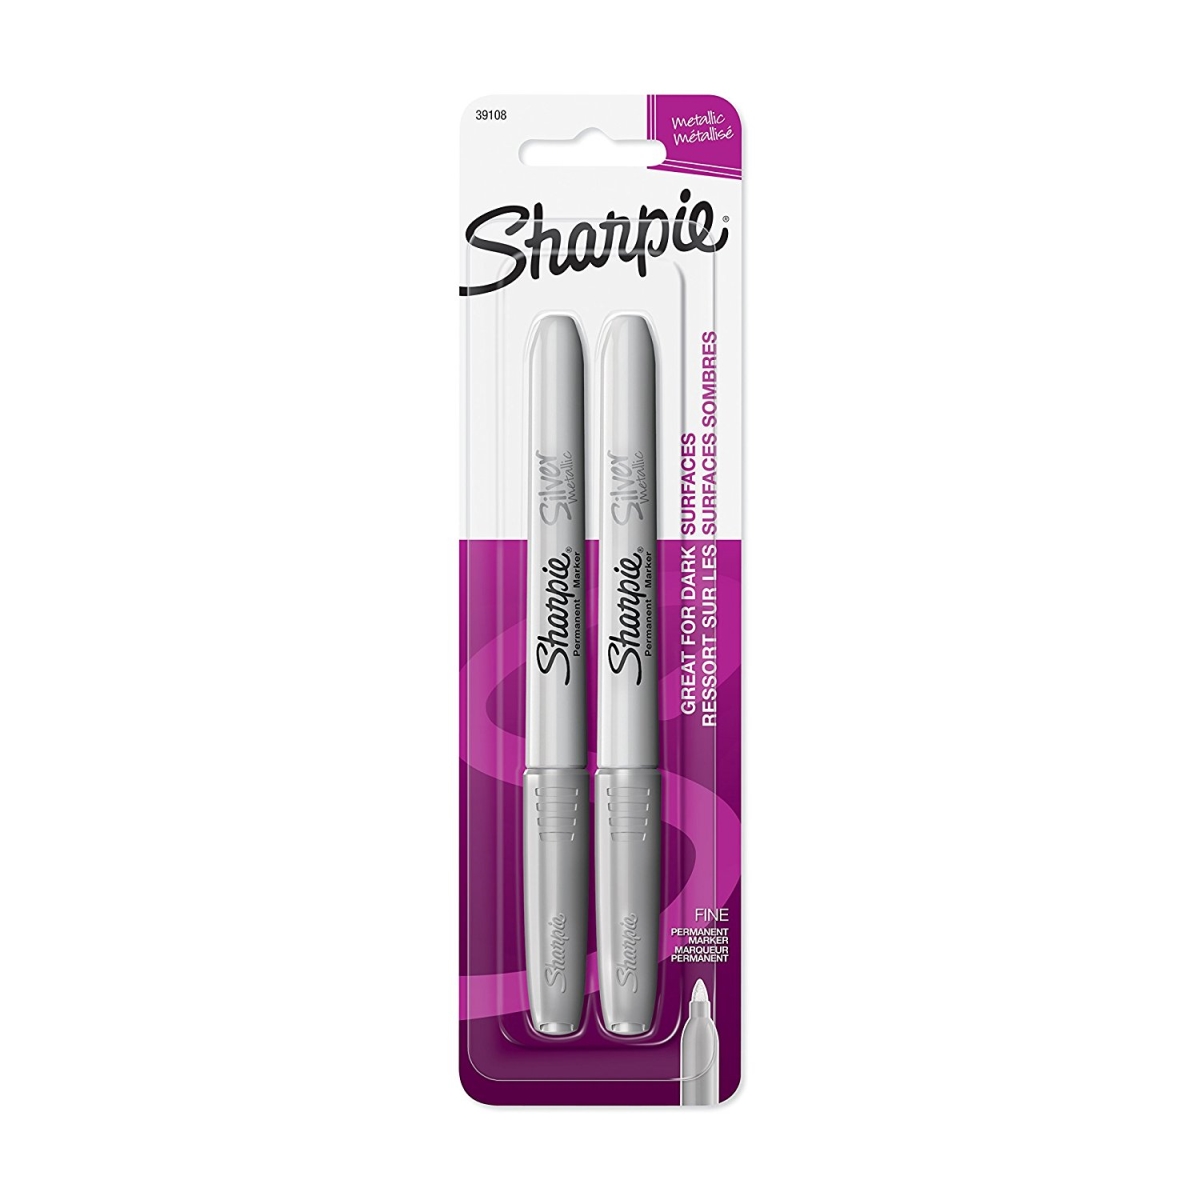 Sharpe Manufacturing Co 652-39108PP